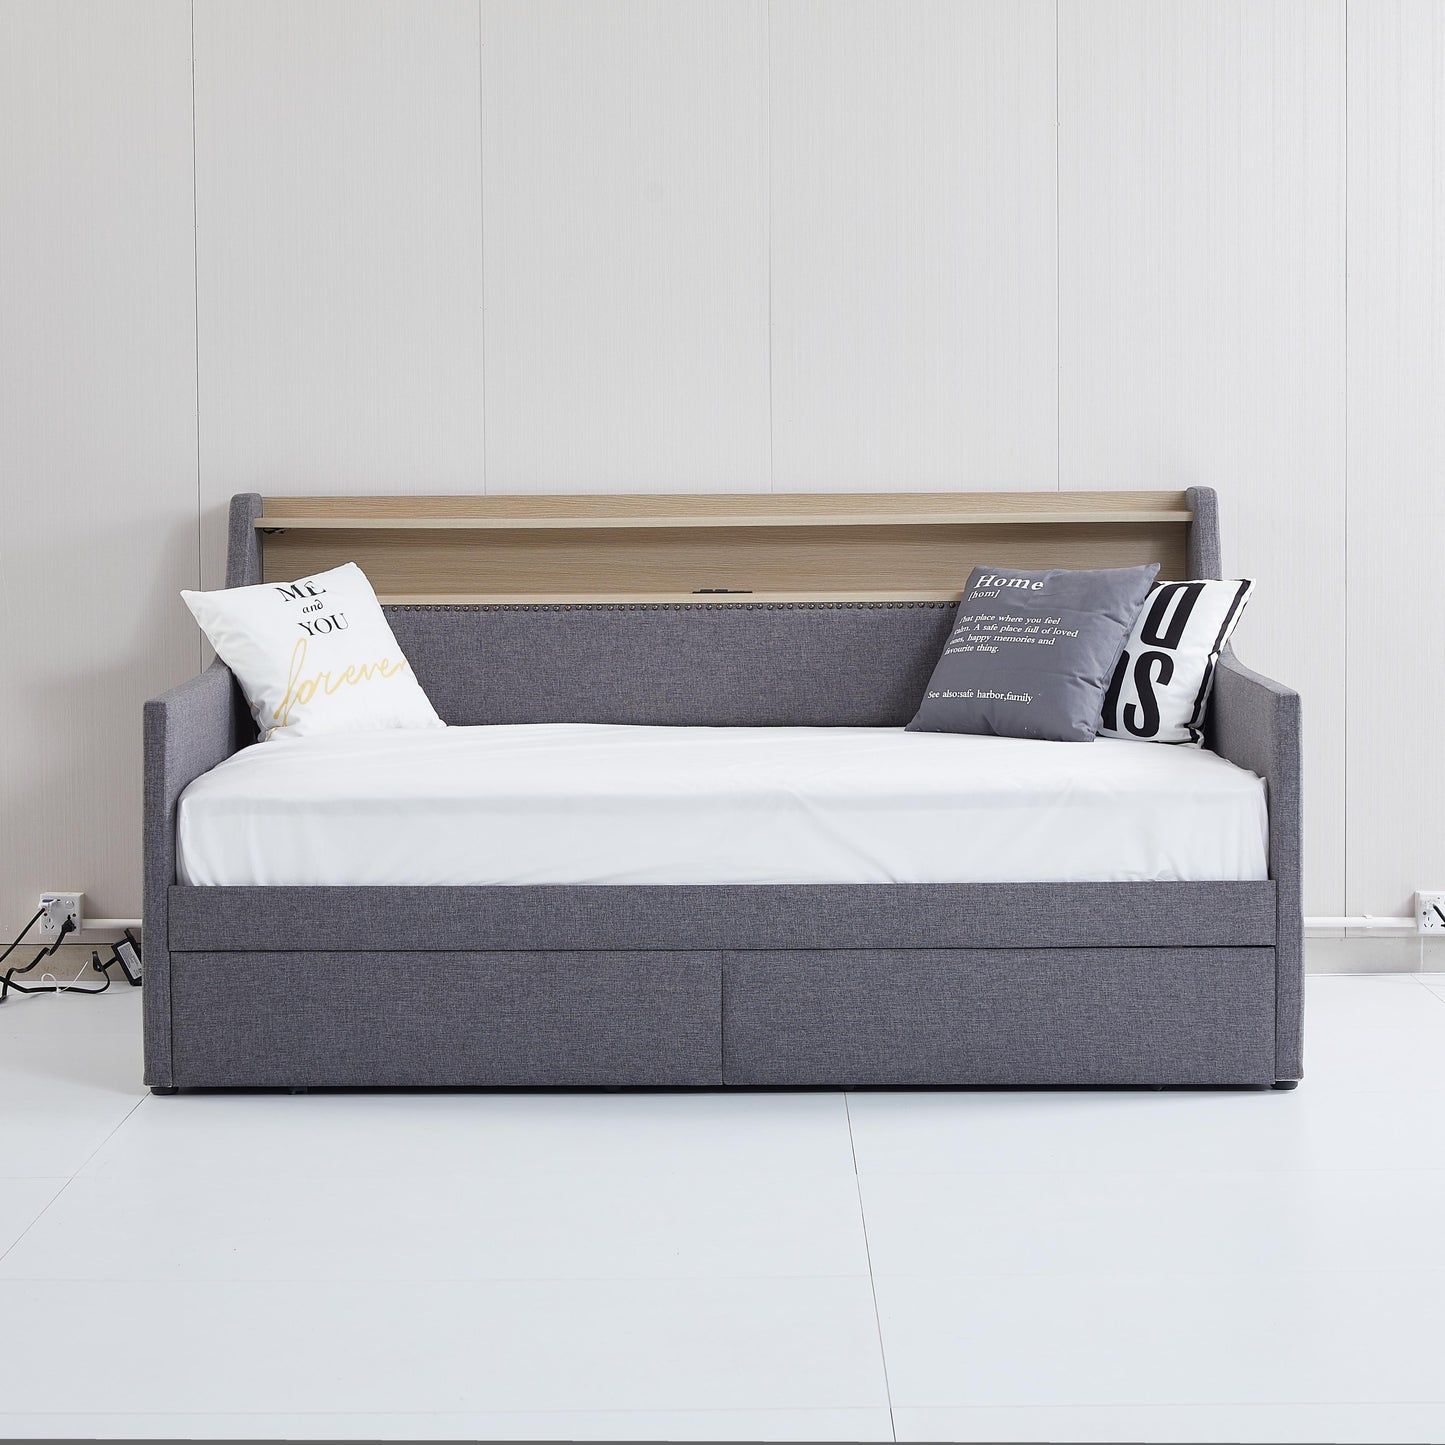 Twin Size Daybed with Storage Drawers, Upholstered Daybed with Charging Station and LED Lights, Gray